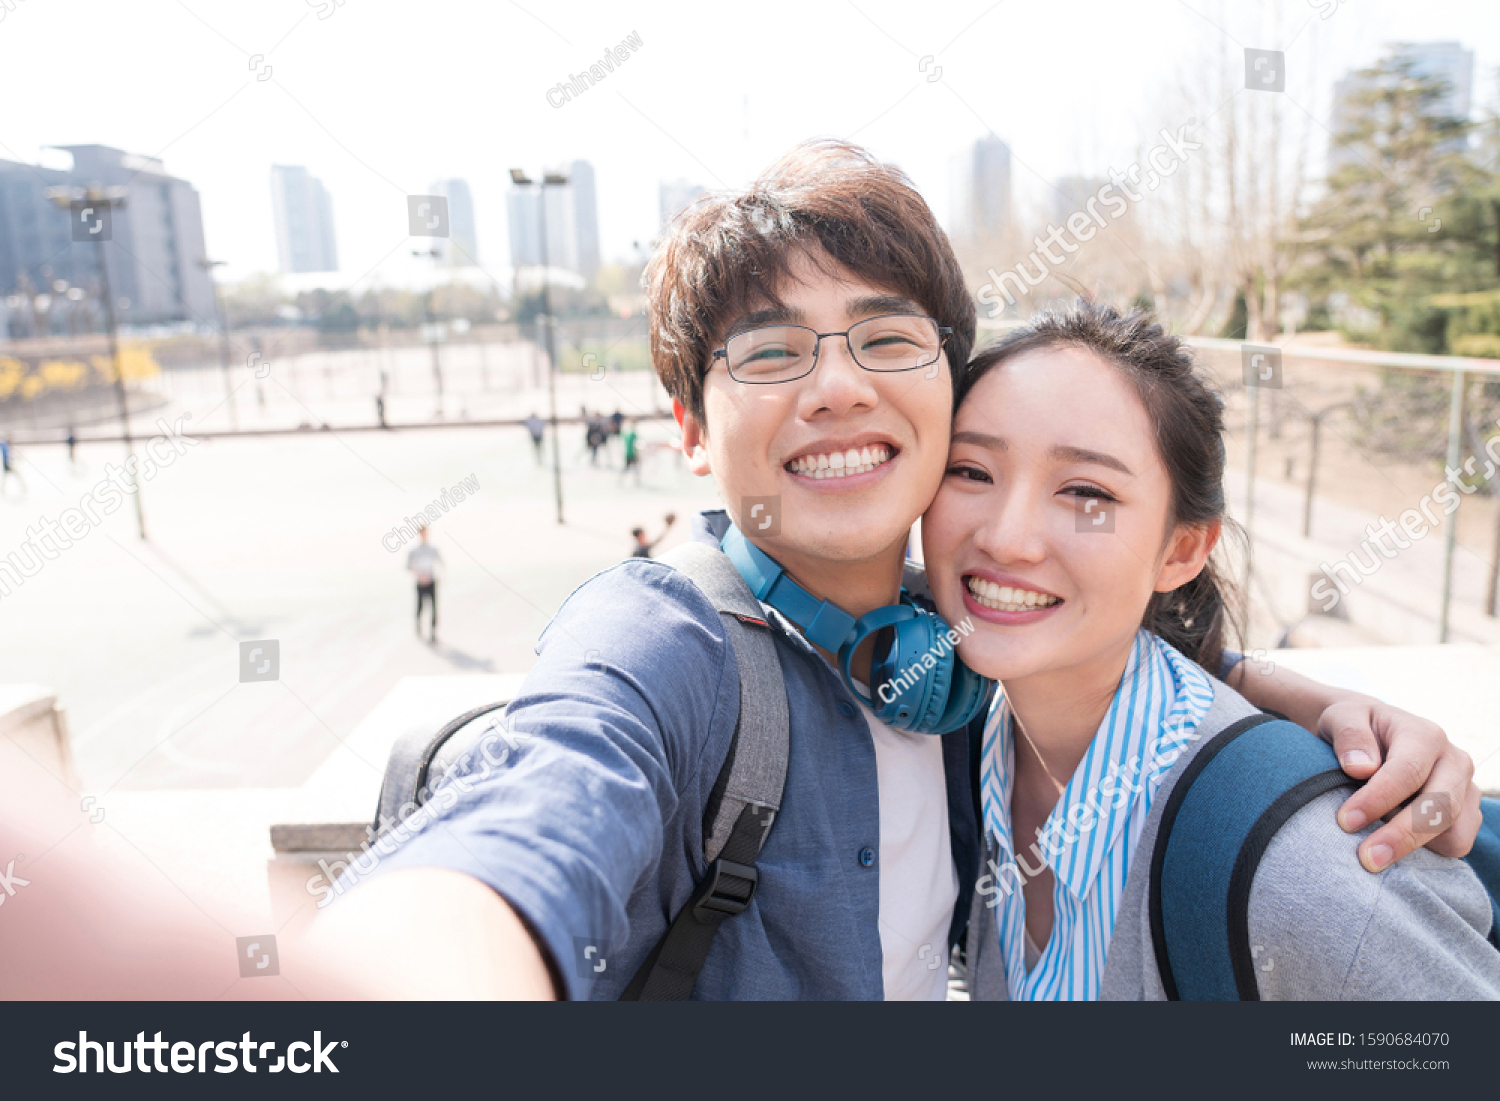 young man and young woman #1590684070